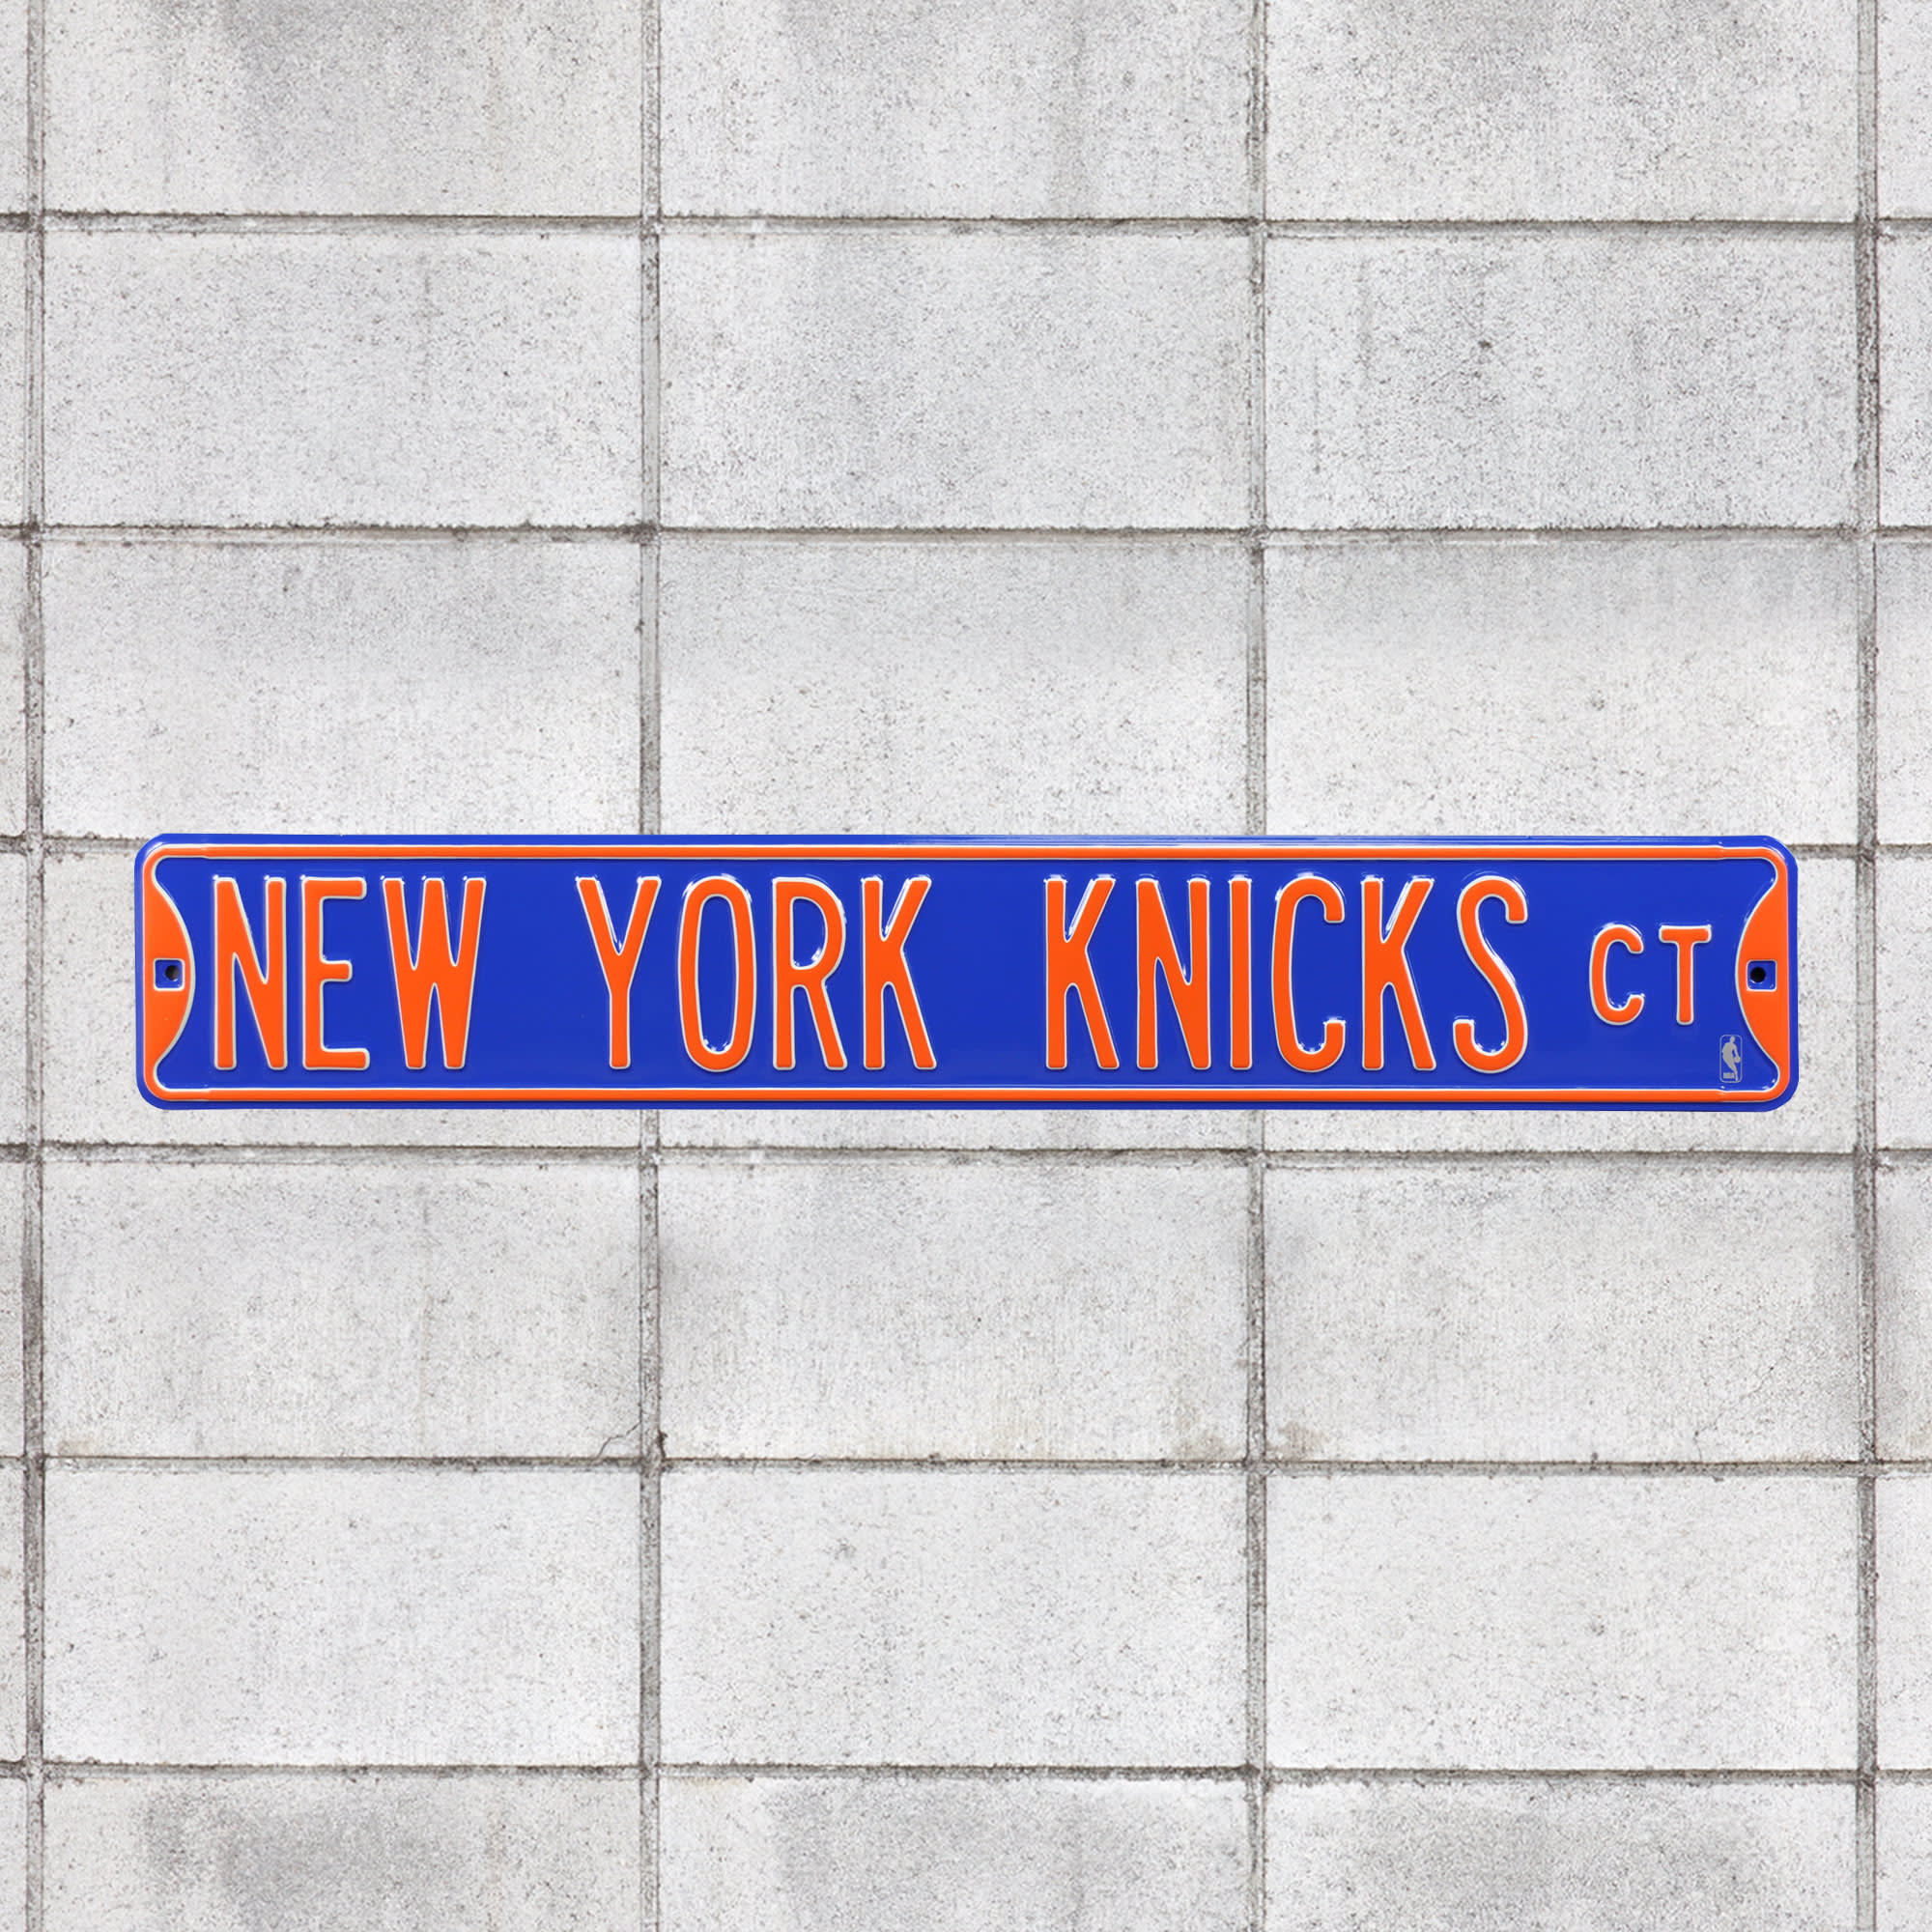 New York Knicks: Court - Officially Licensed NBA Metal Street Sign 36.0"W x 6.0"H by Fathead | 100% Steel